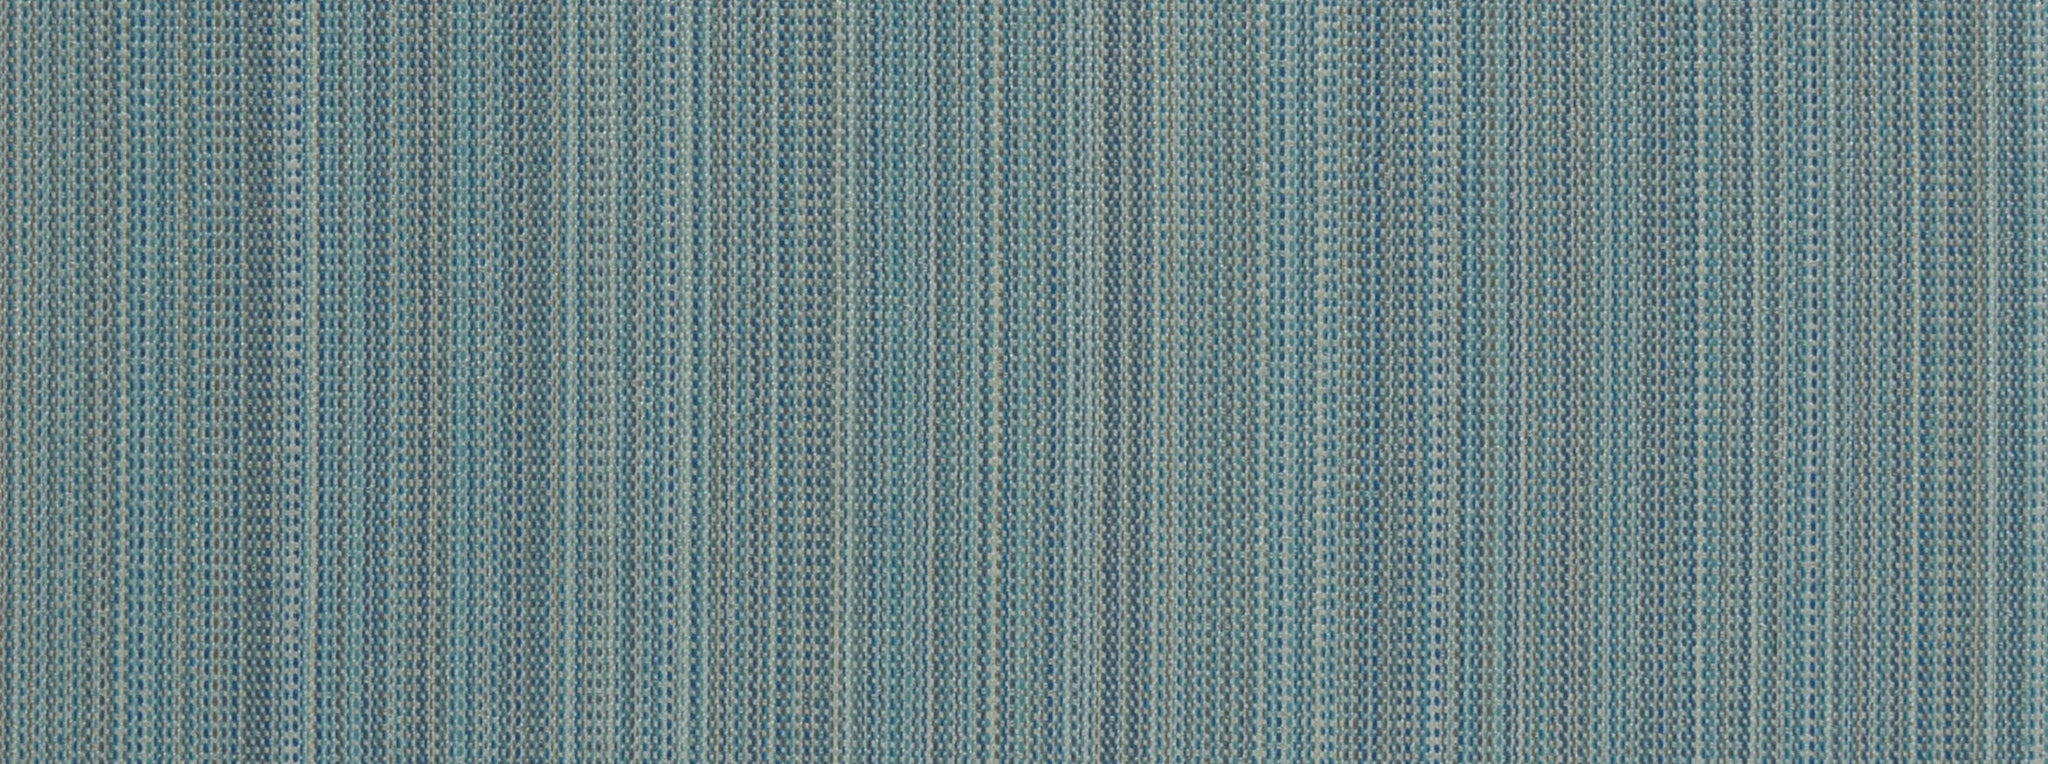 MAYFAIR FINE STRIPE MADE TO MEASURE COTTON DRAPES (BLUE/ GREEN/NAVY)